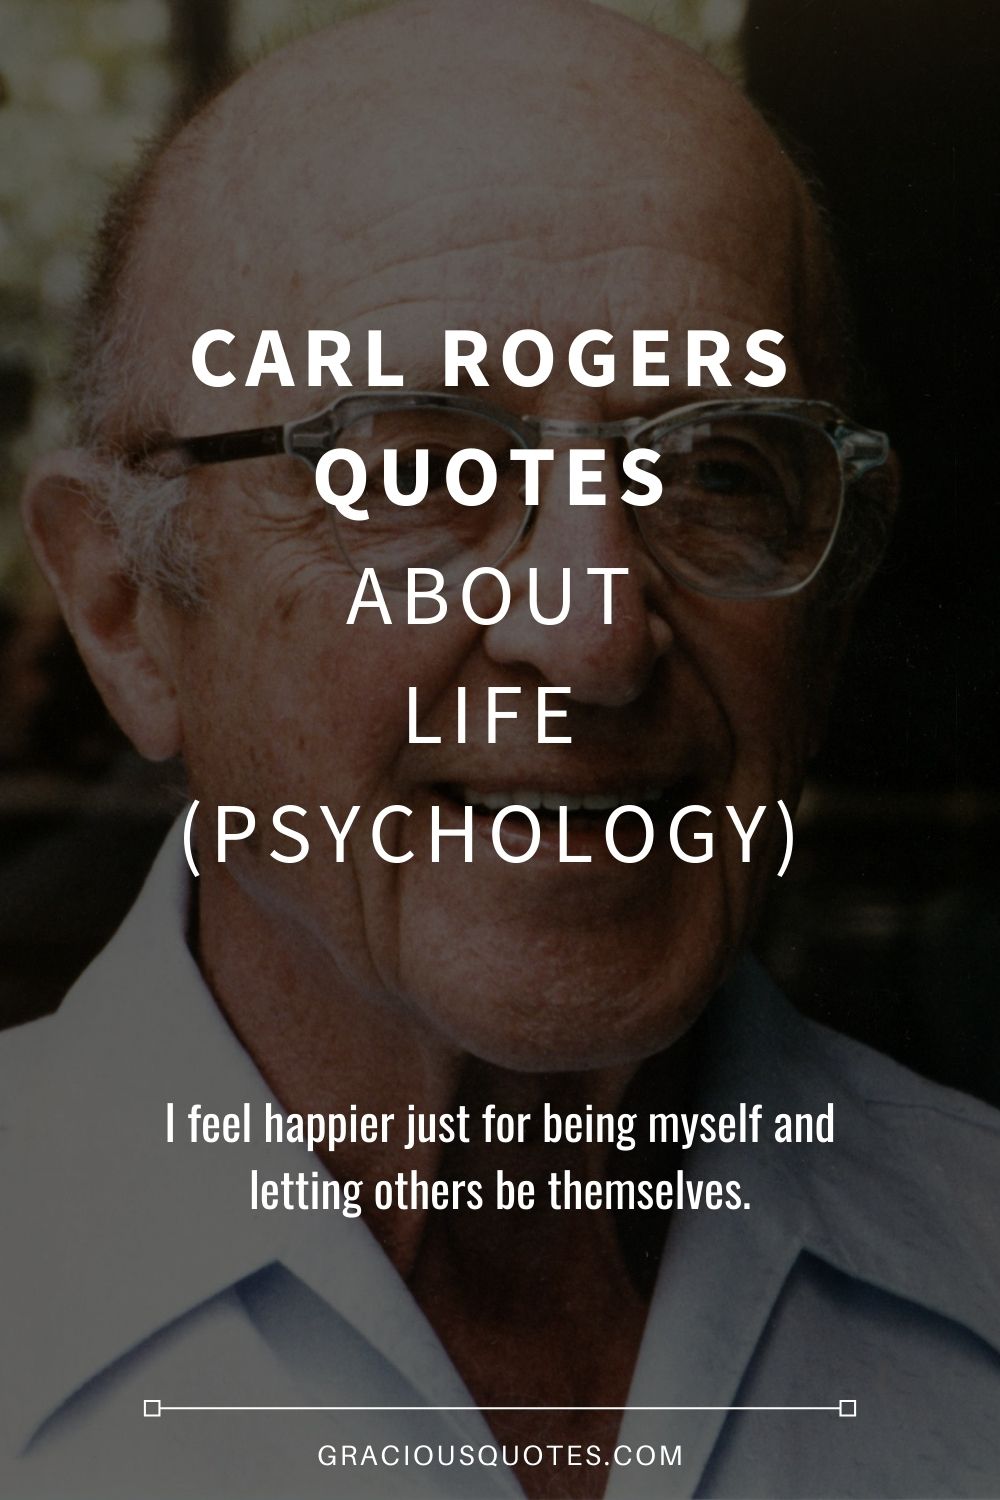 Carl Rogers Quotes About Life (PSYCHOLOGY) - Gracious Quotes